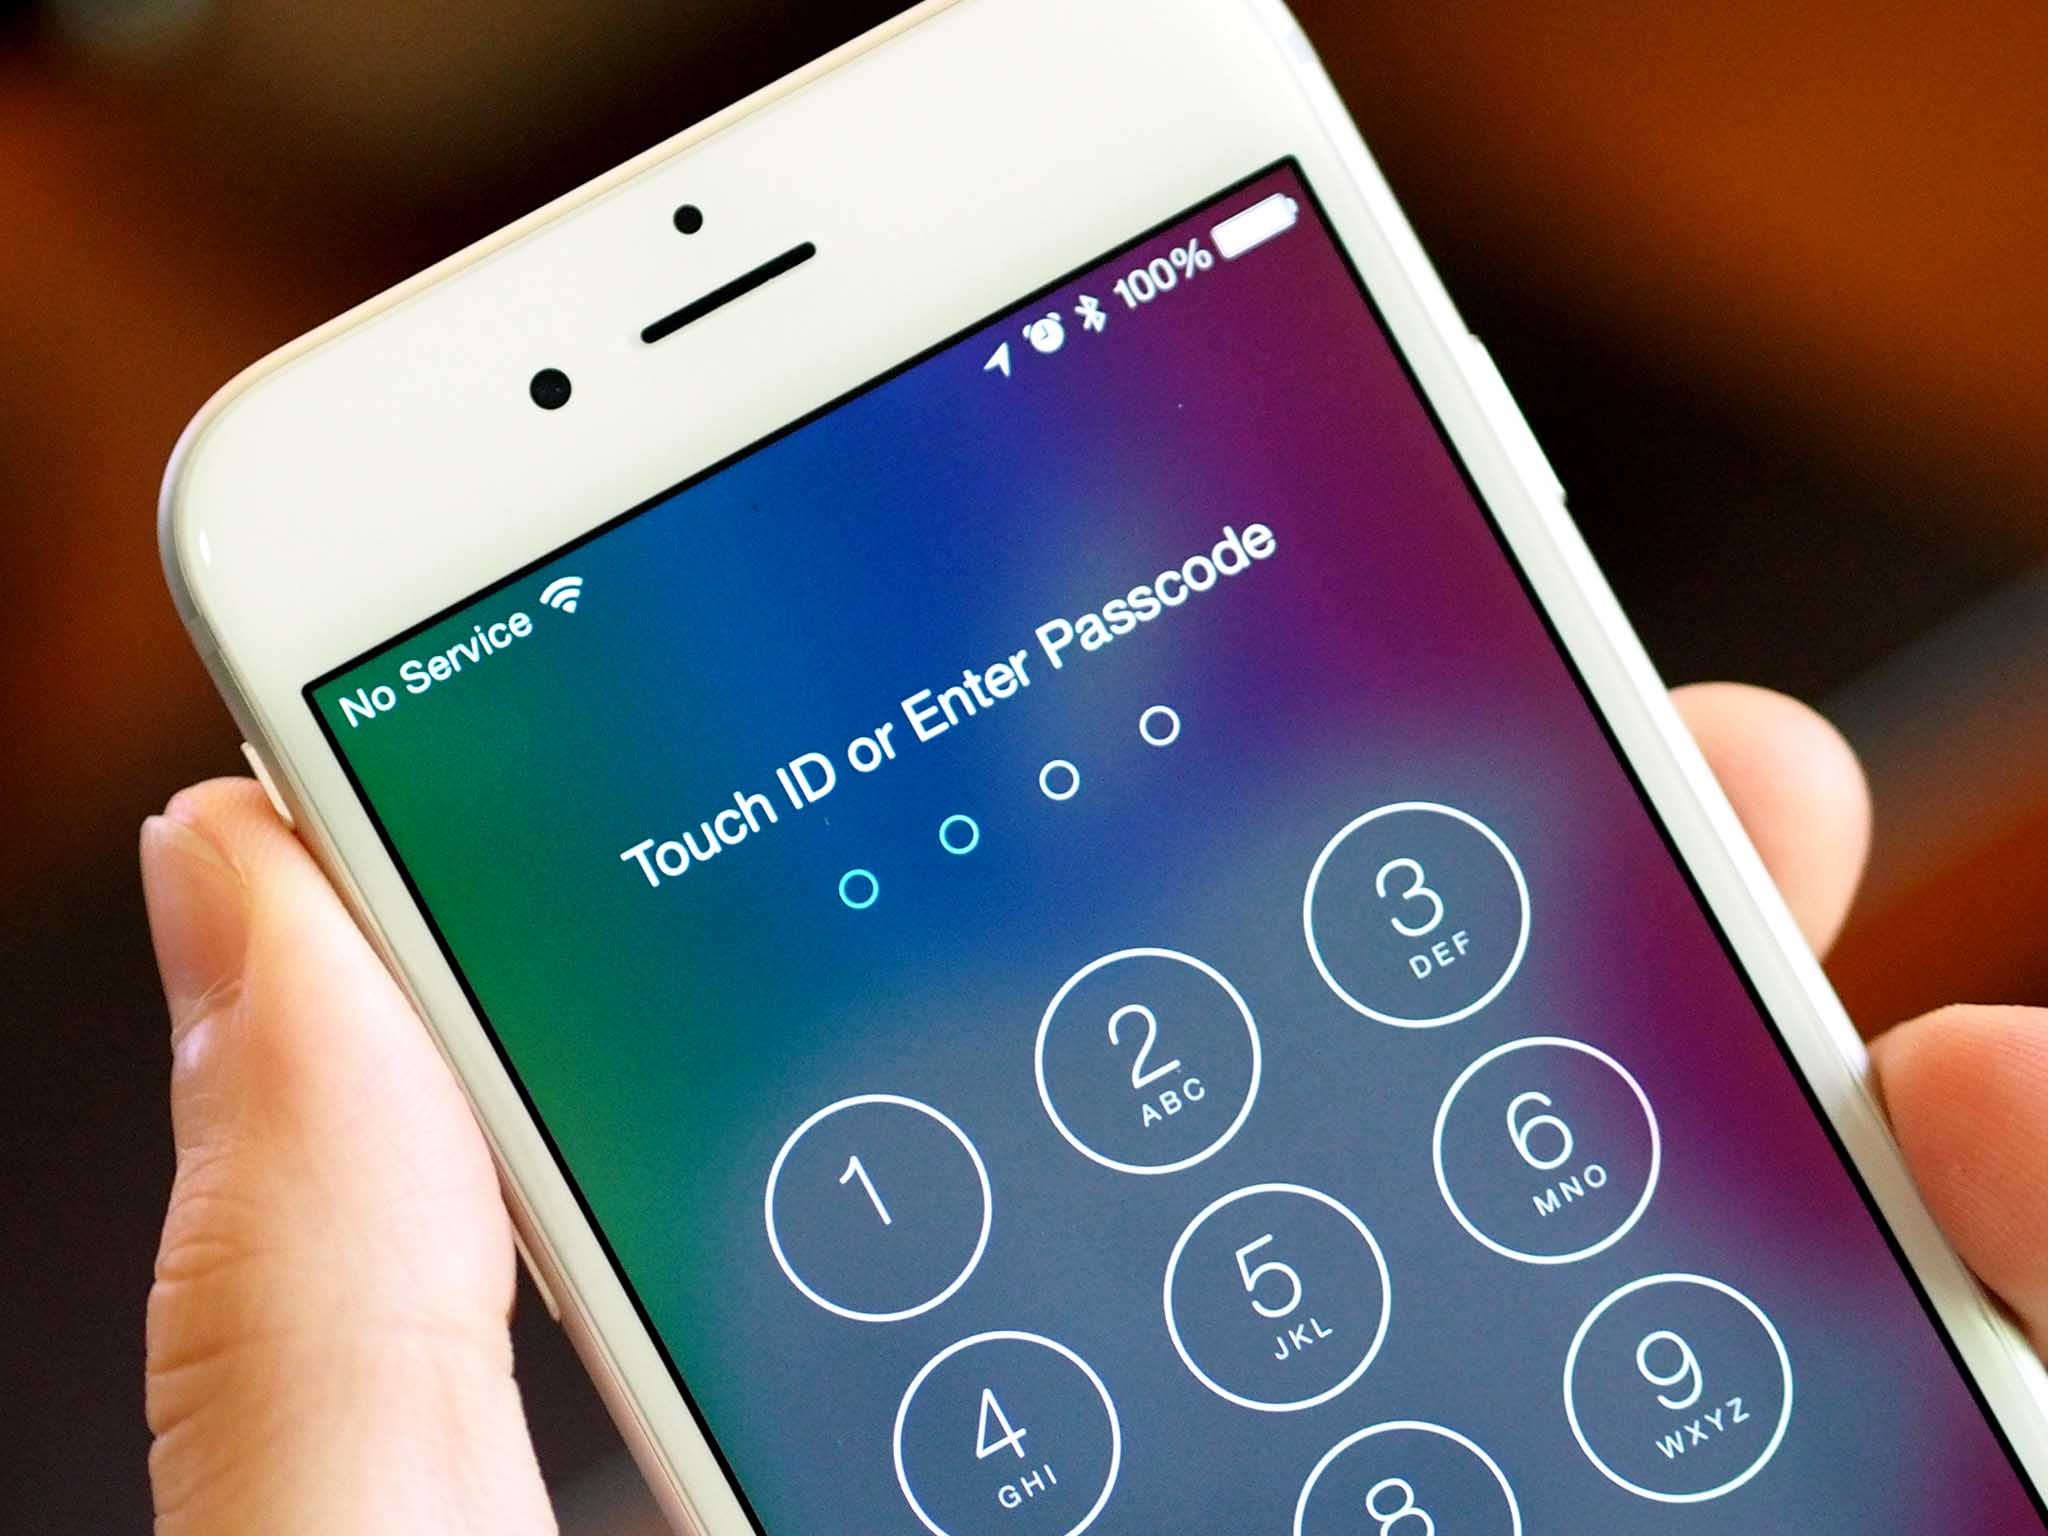 iOS 8.0.1 cripples [Touch ID](/touch-id) and cell service